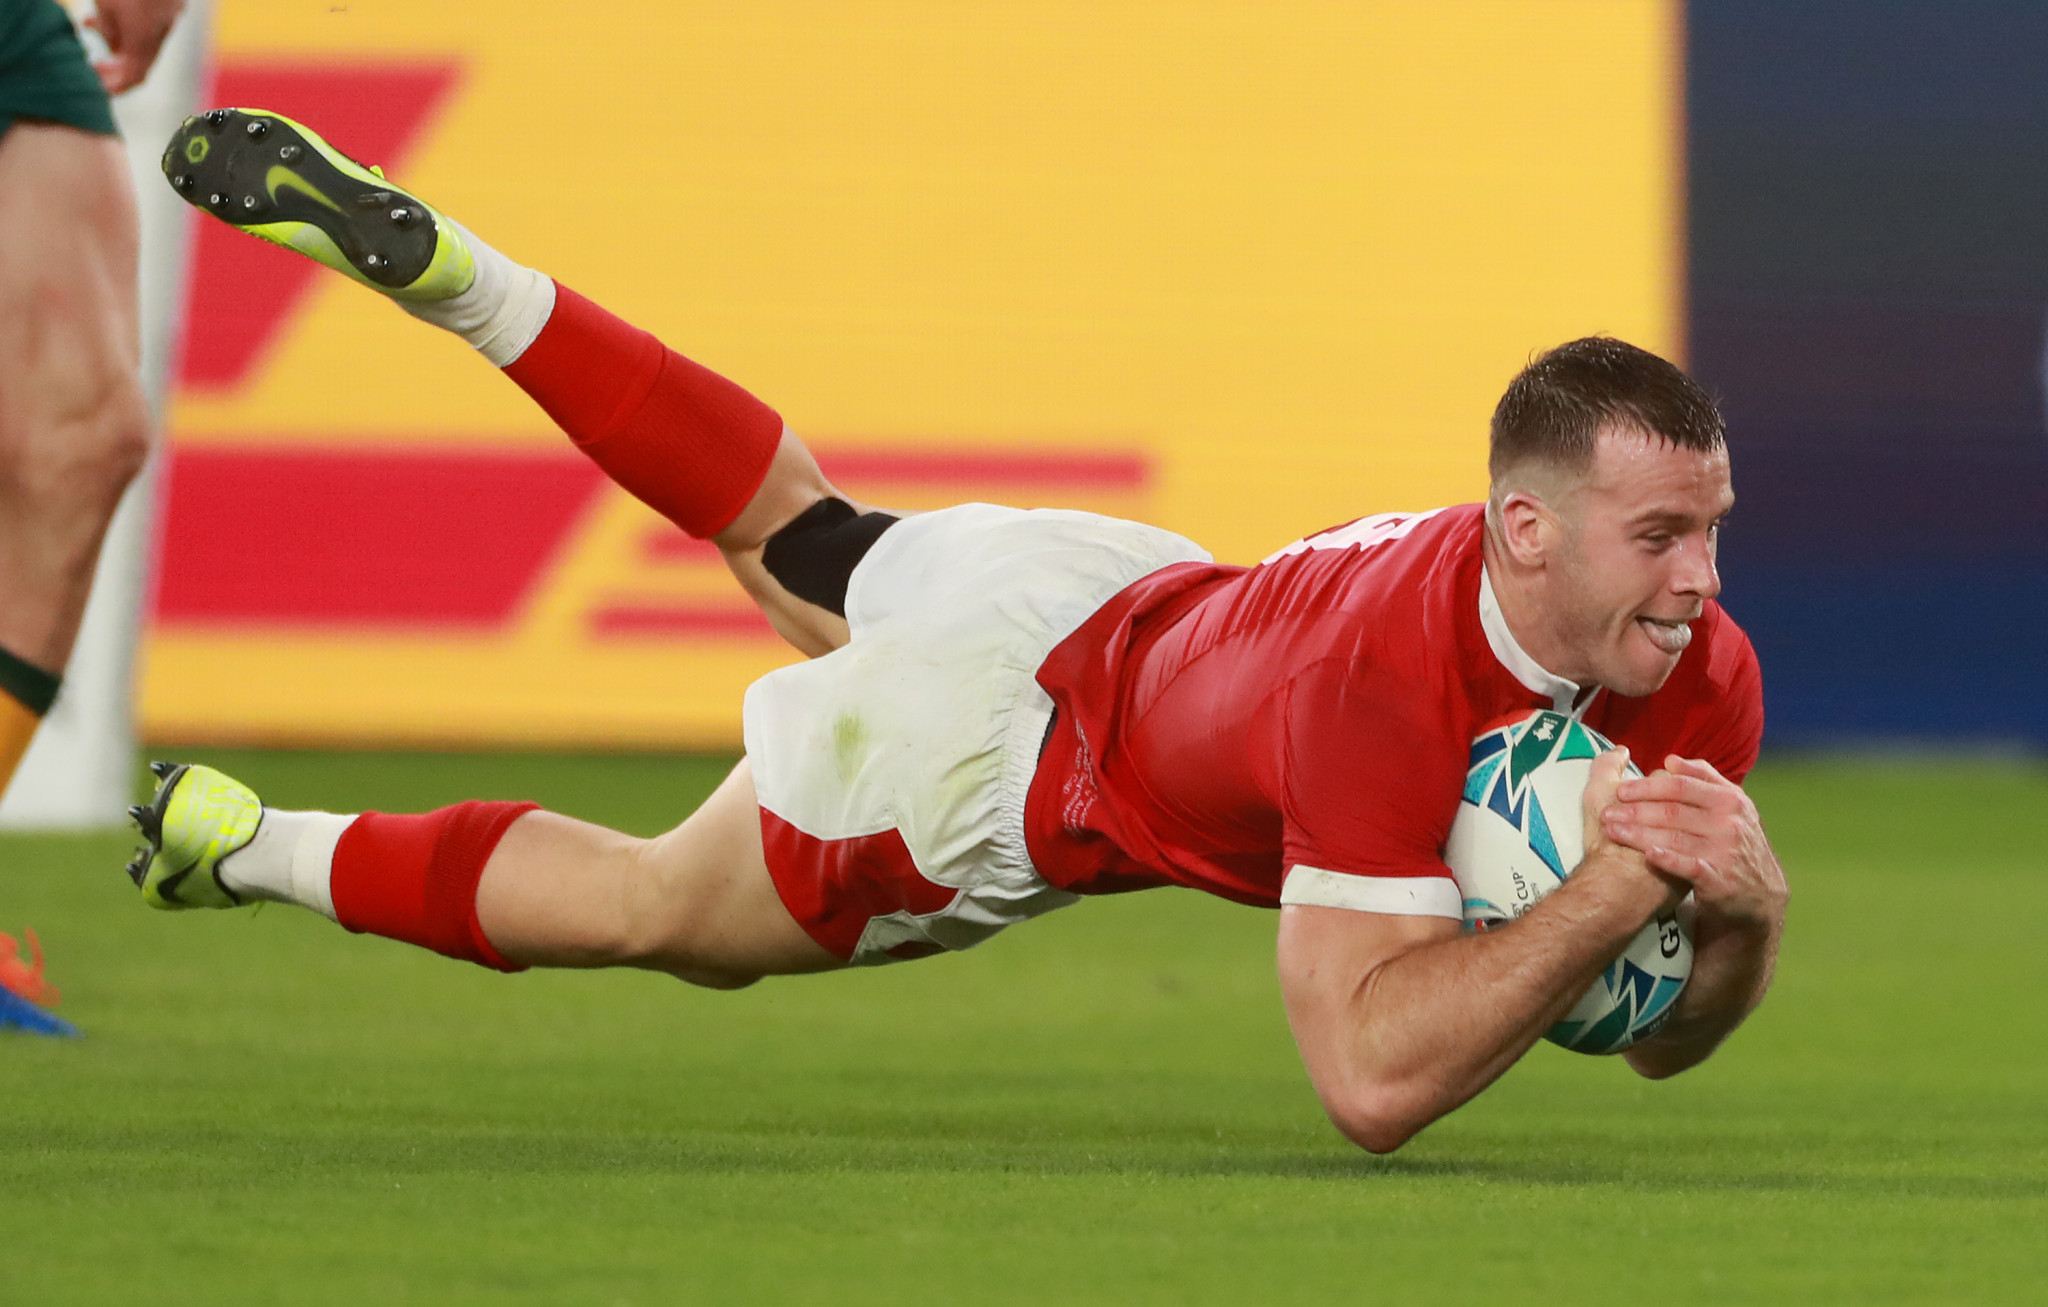 Gareth Davies went over the whitewash as Wales took control in the first half ©Getty Images